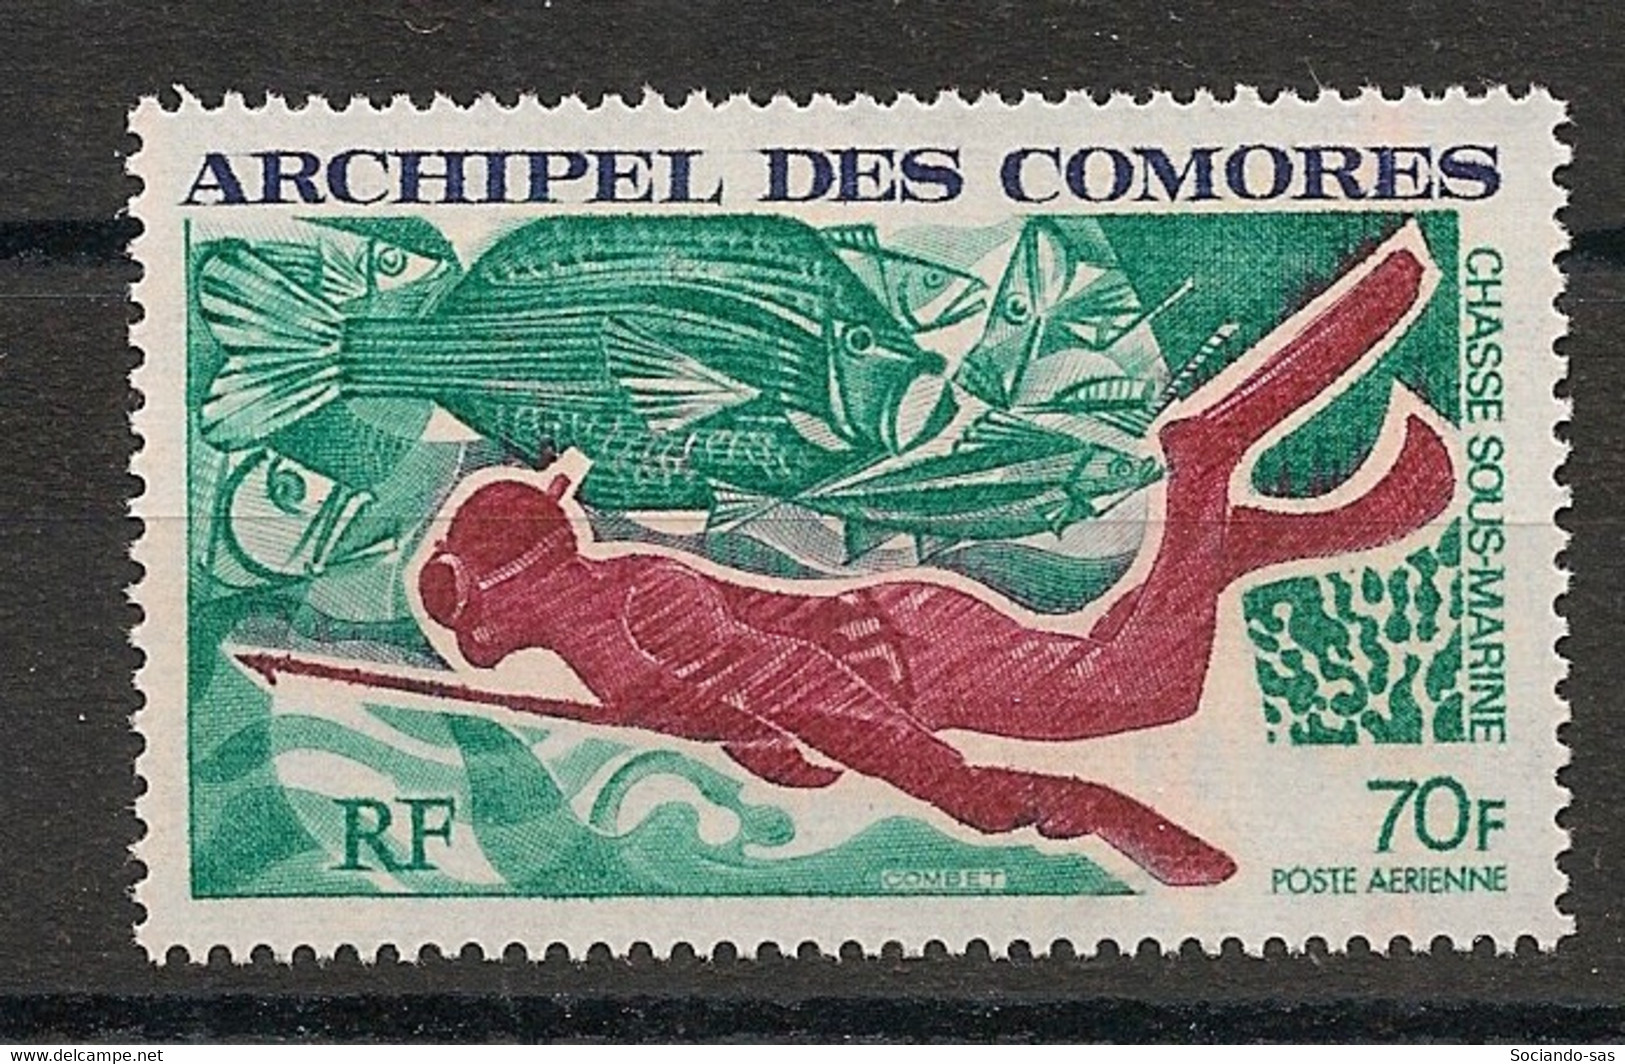 COMORES - 1972 - Poste Aérienne PA N°Yv. 44 - Plongée / Diving - Neuf Luxe ** / MNH / Postfrisch - Diving